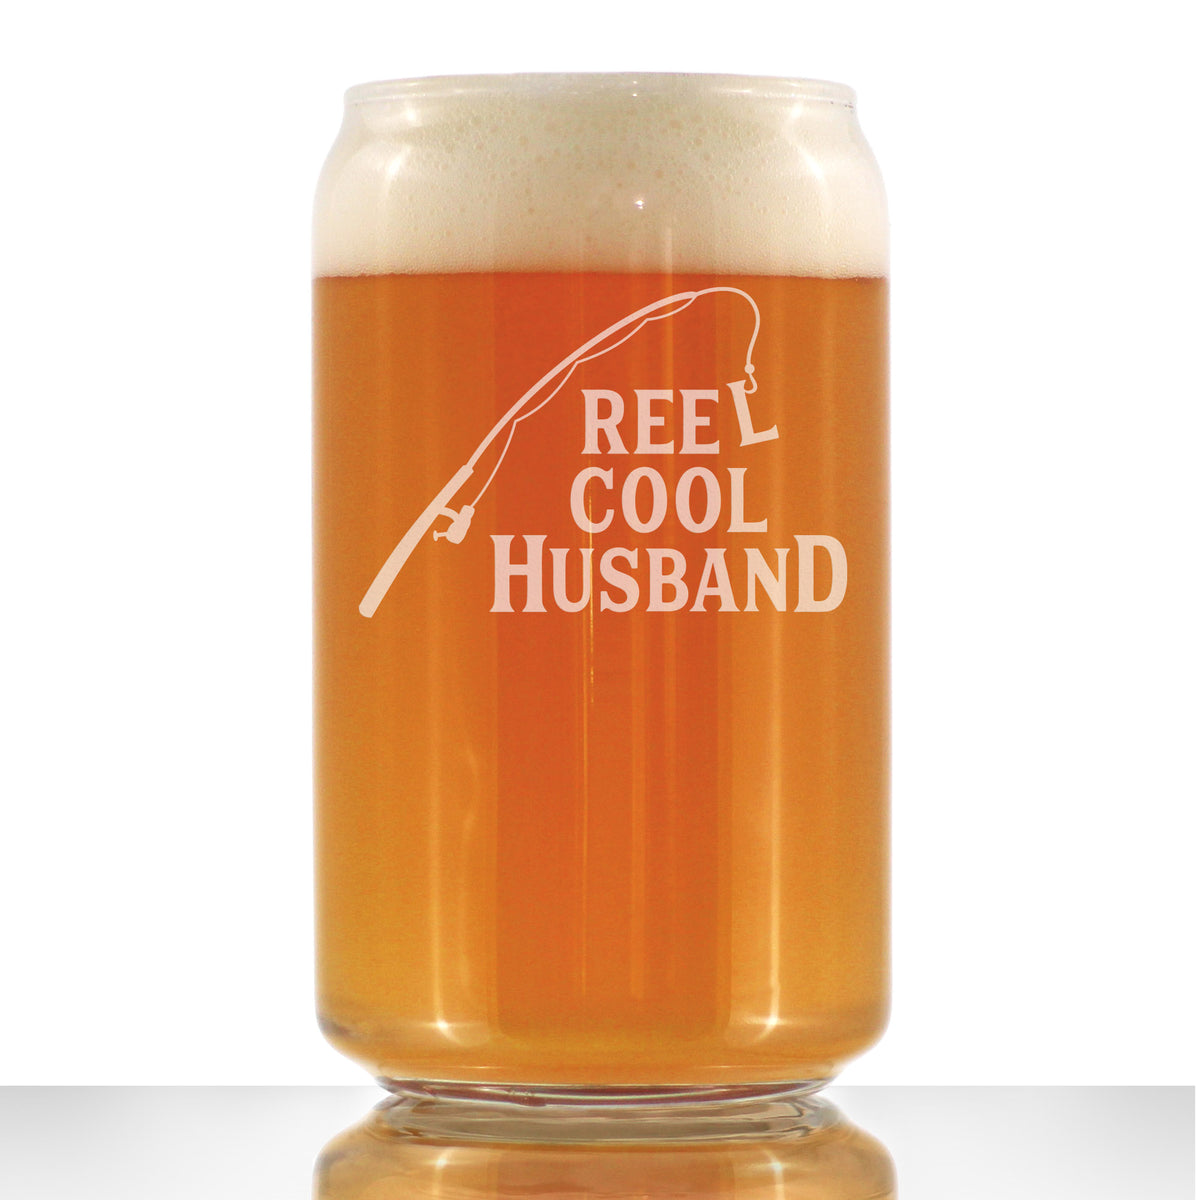 Reel Cool Husband - Beer Can Pint Glass - Funny Fishing Gifts for Fisherman Husbands - Fun Fish 16 oz Cups